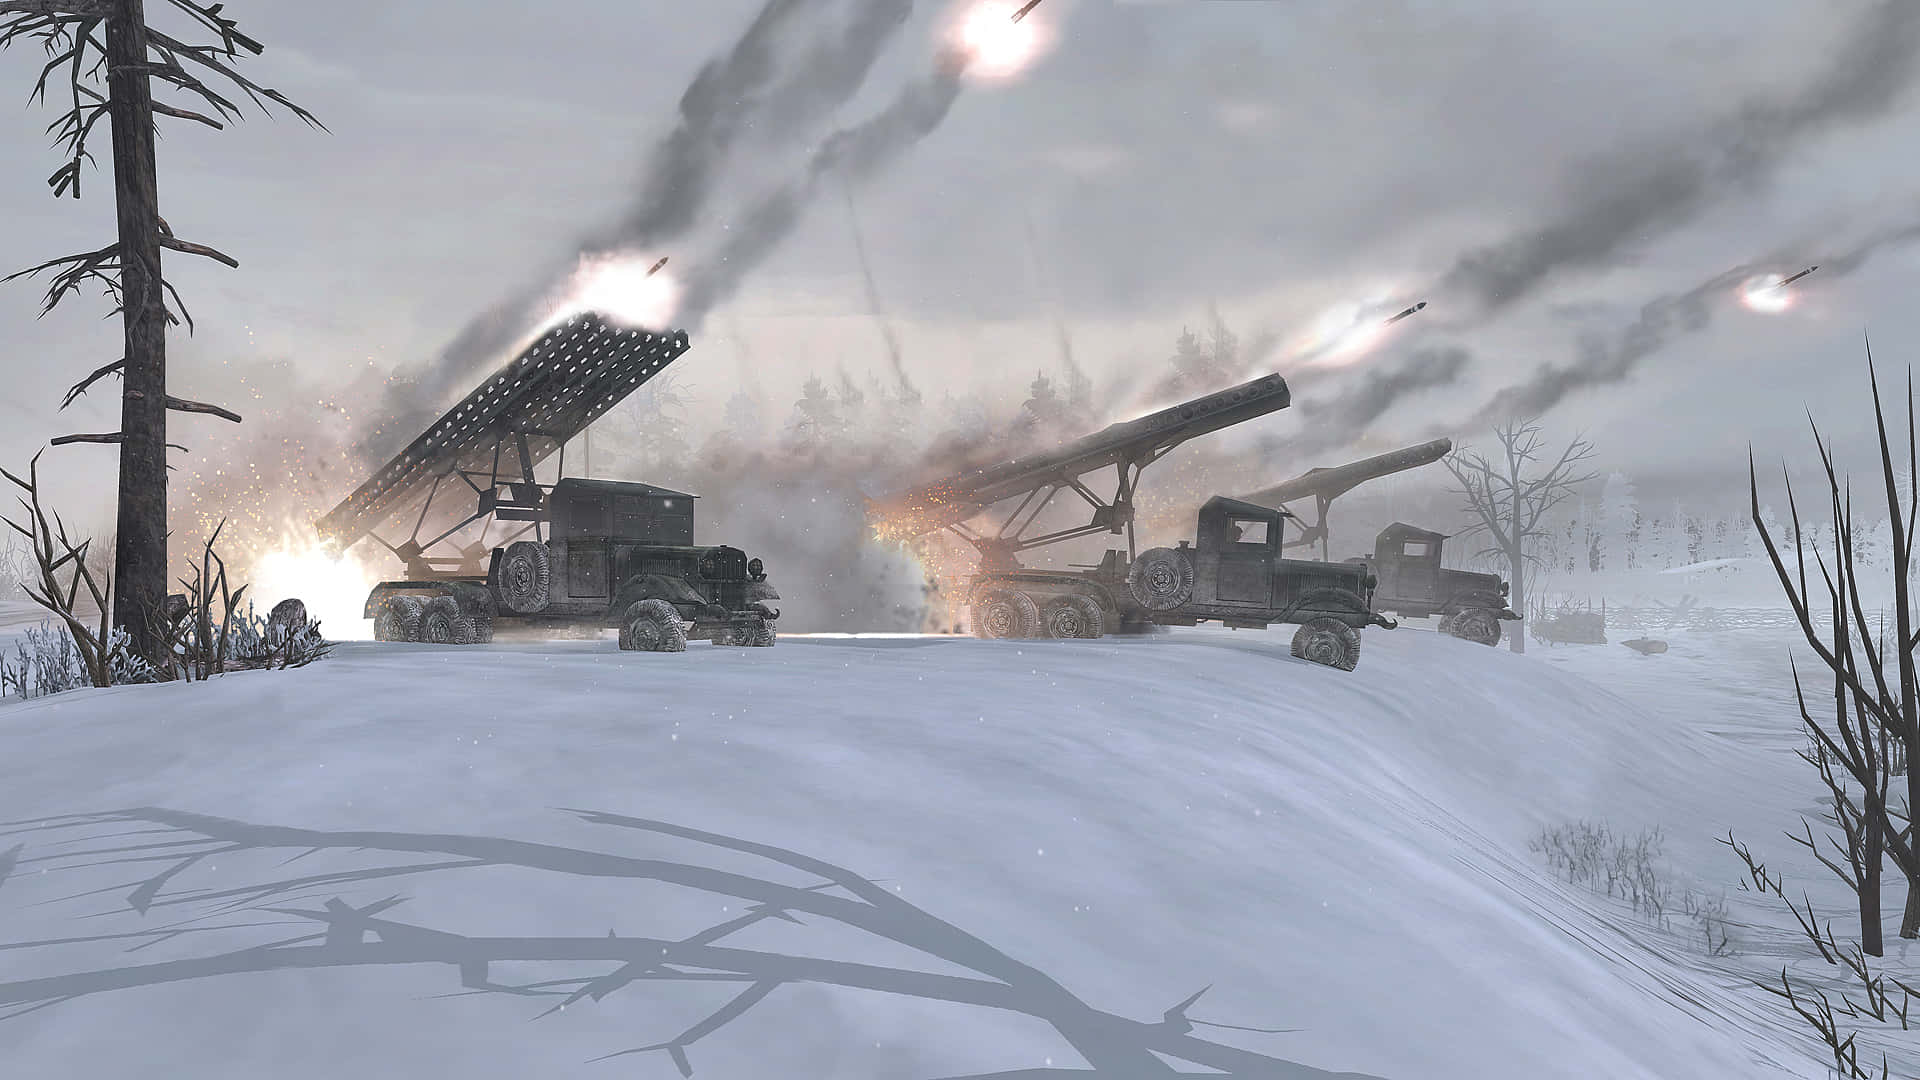 A Video Game Showing A Snowy Scene With A Military Vehicle